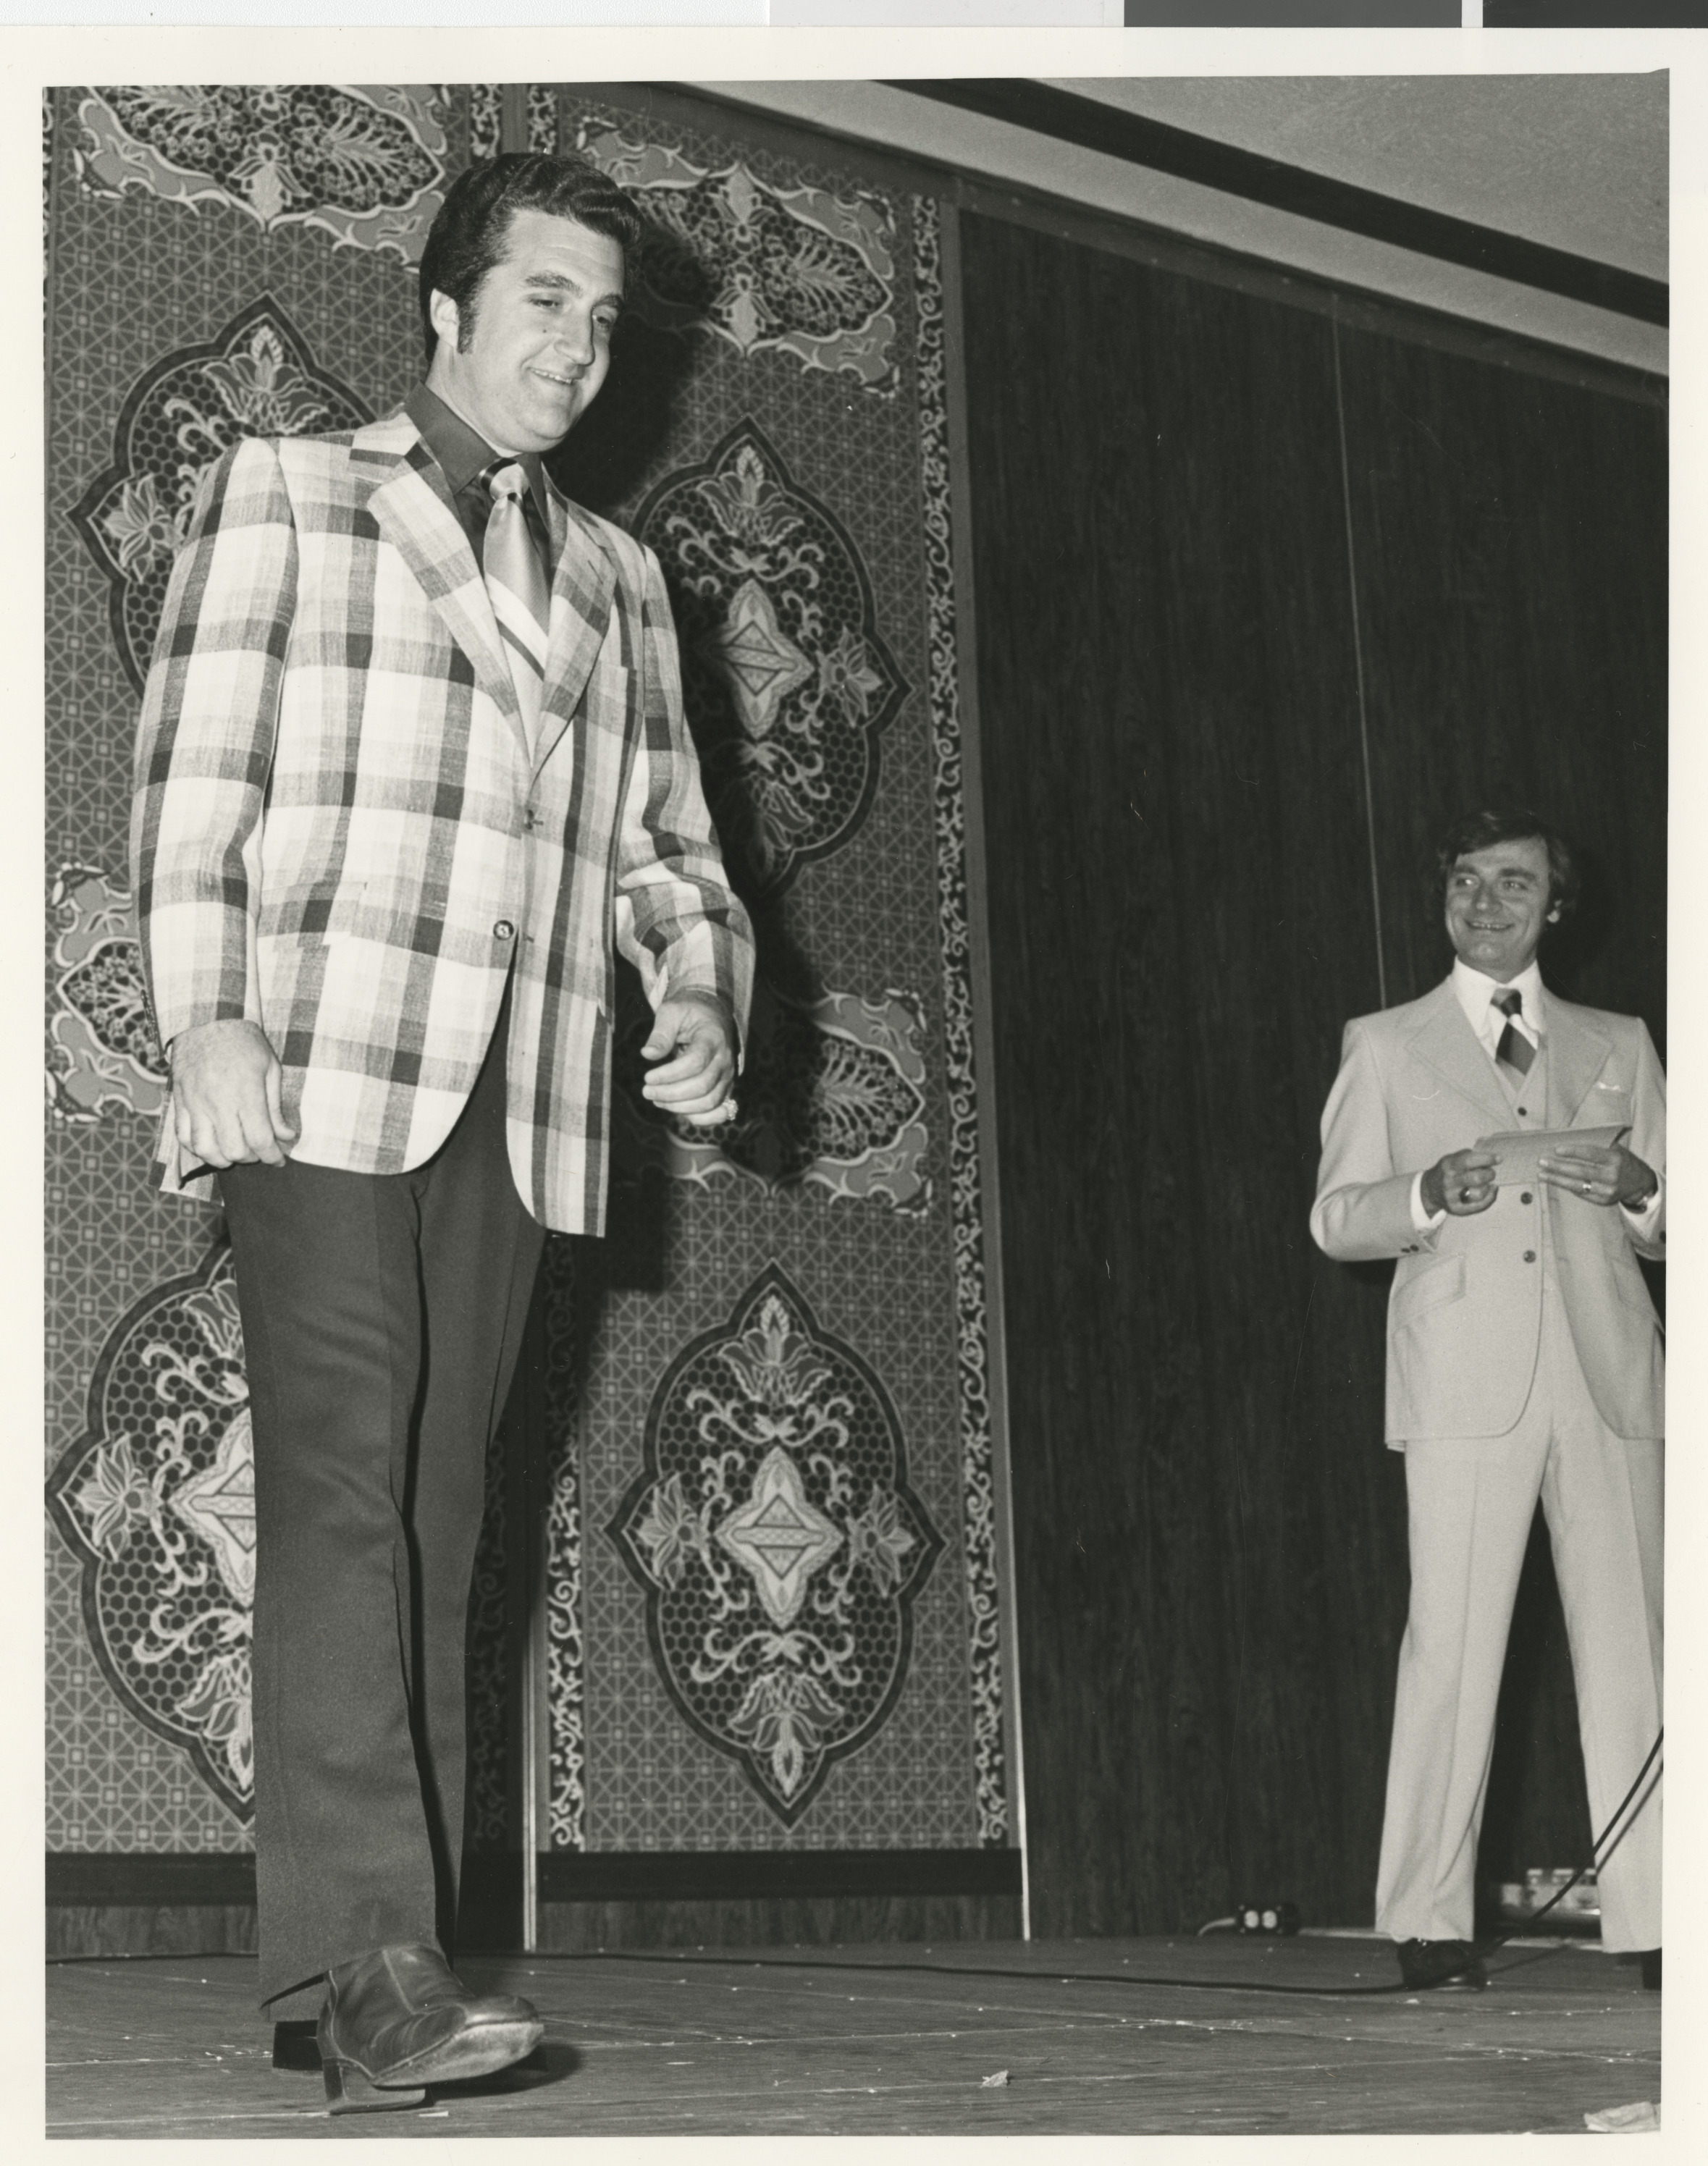 Photograph of Ron Lurie on stage at an event